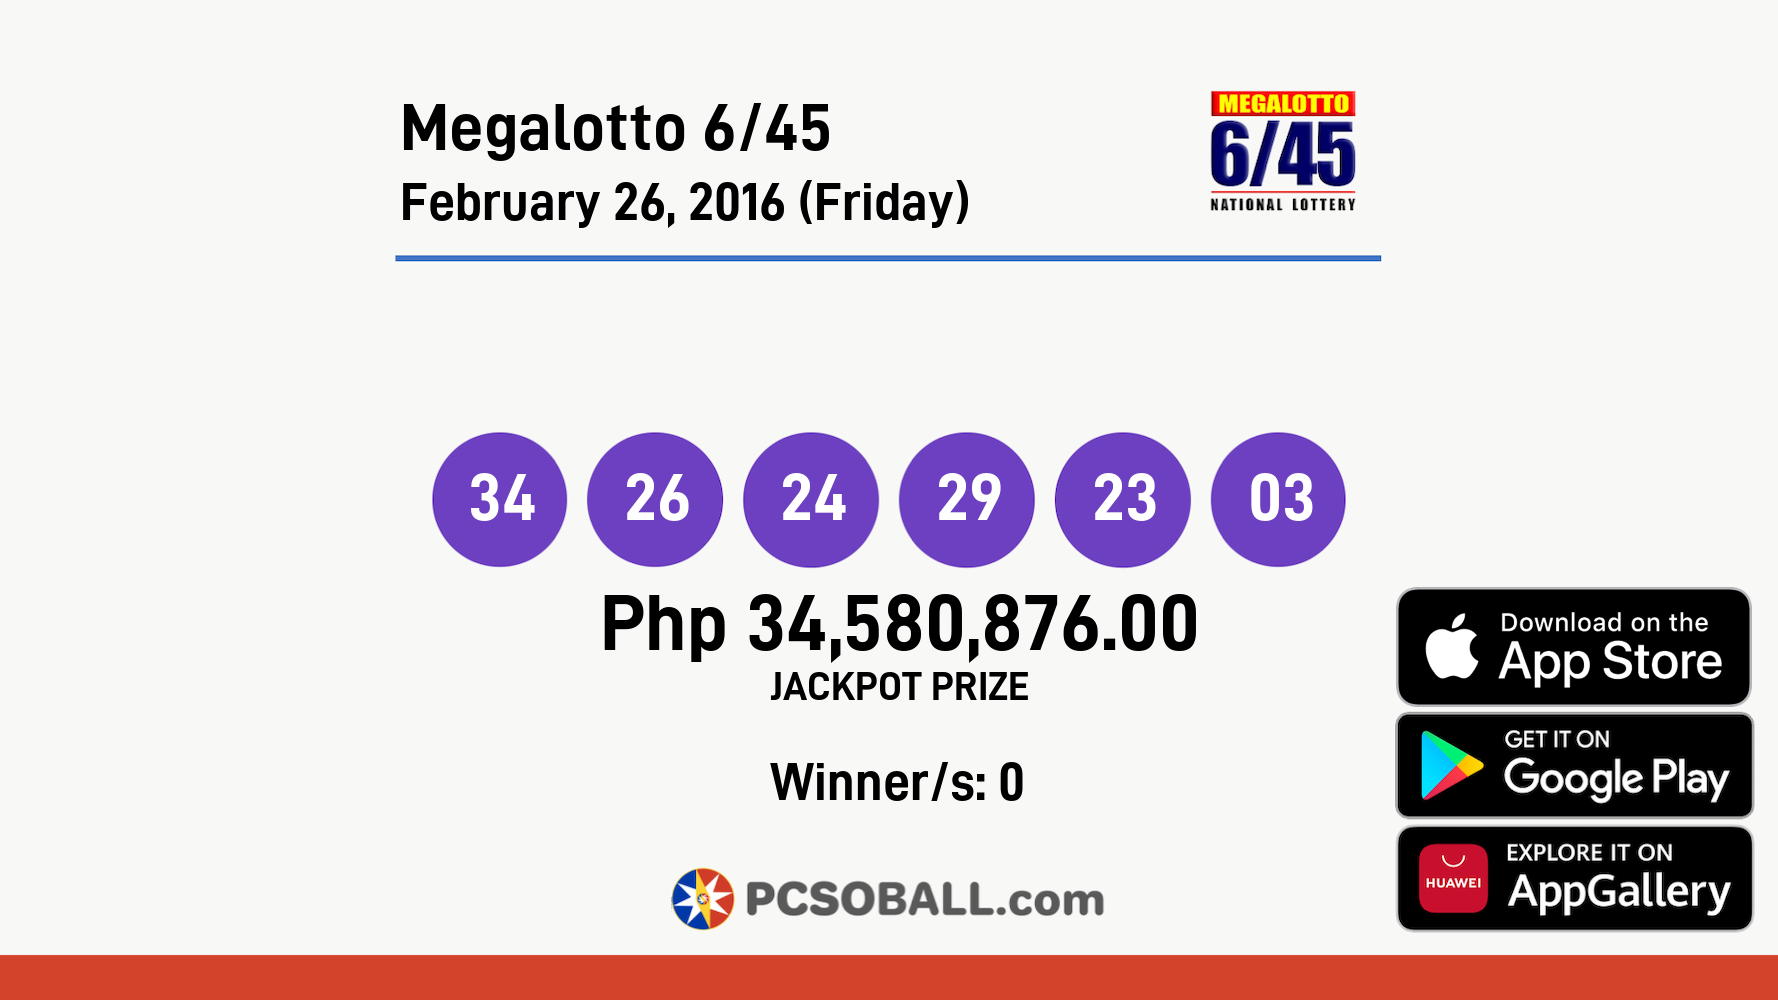 Megalotto 6/45 February 26, 2016 (Friday) Result